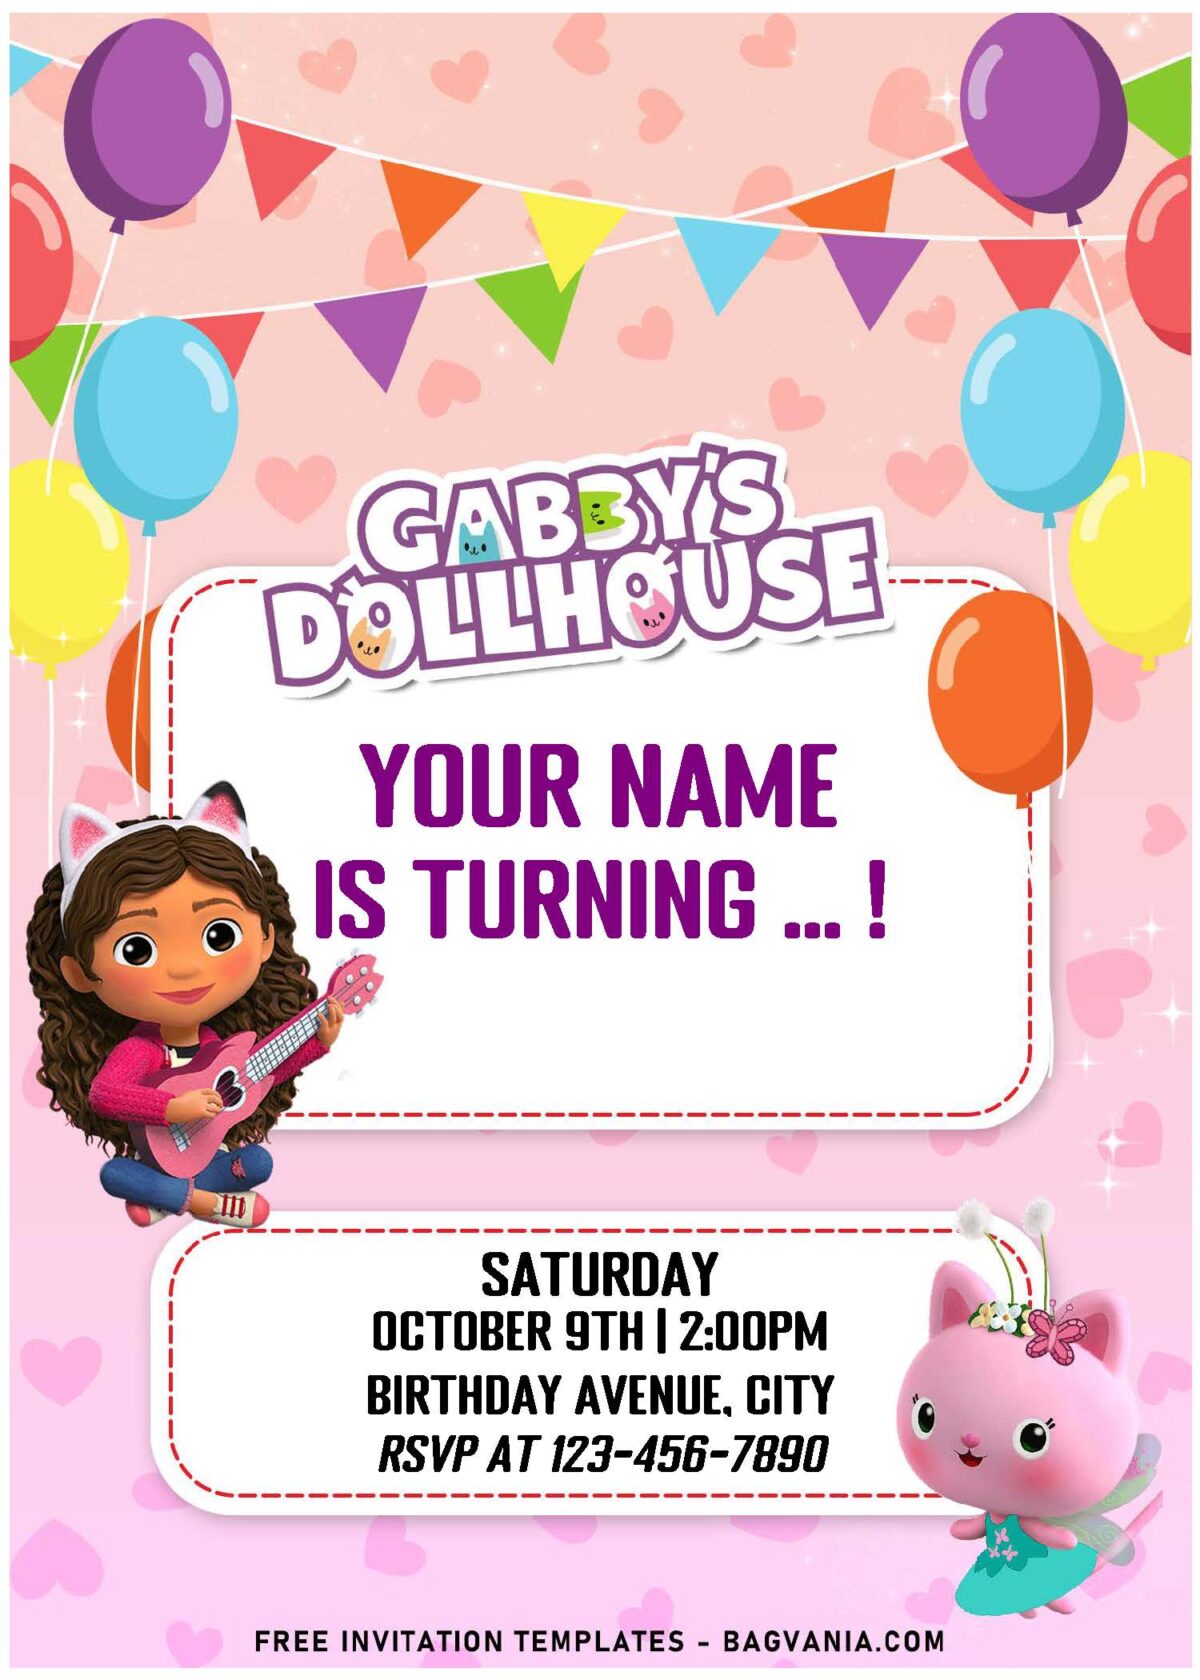 (Free Editable PDF) Purr-fect Gabby's Dollhouse Birthday Invitation Templates with colorful balloons